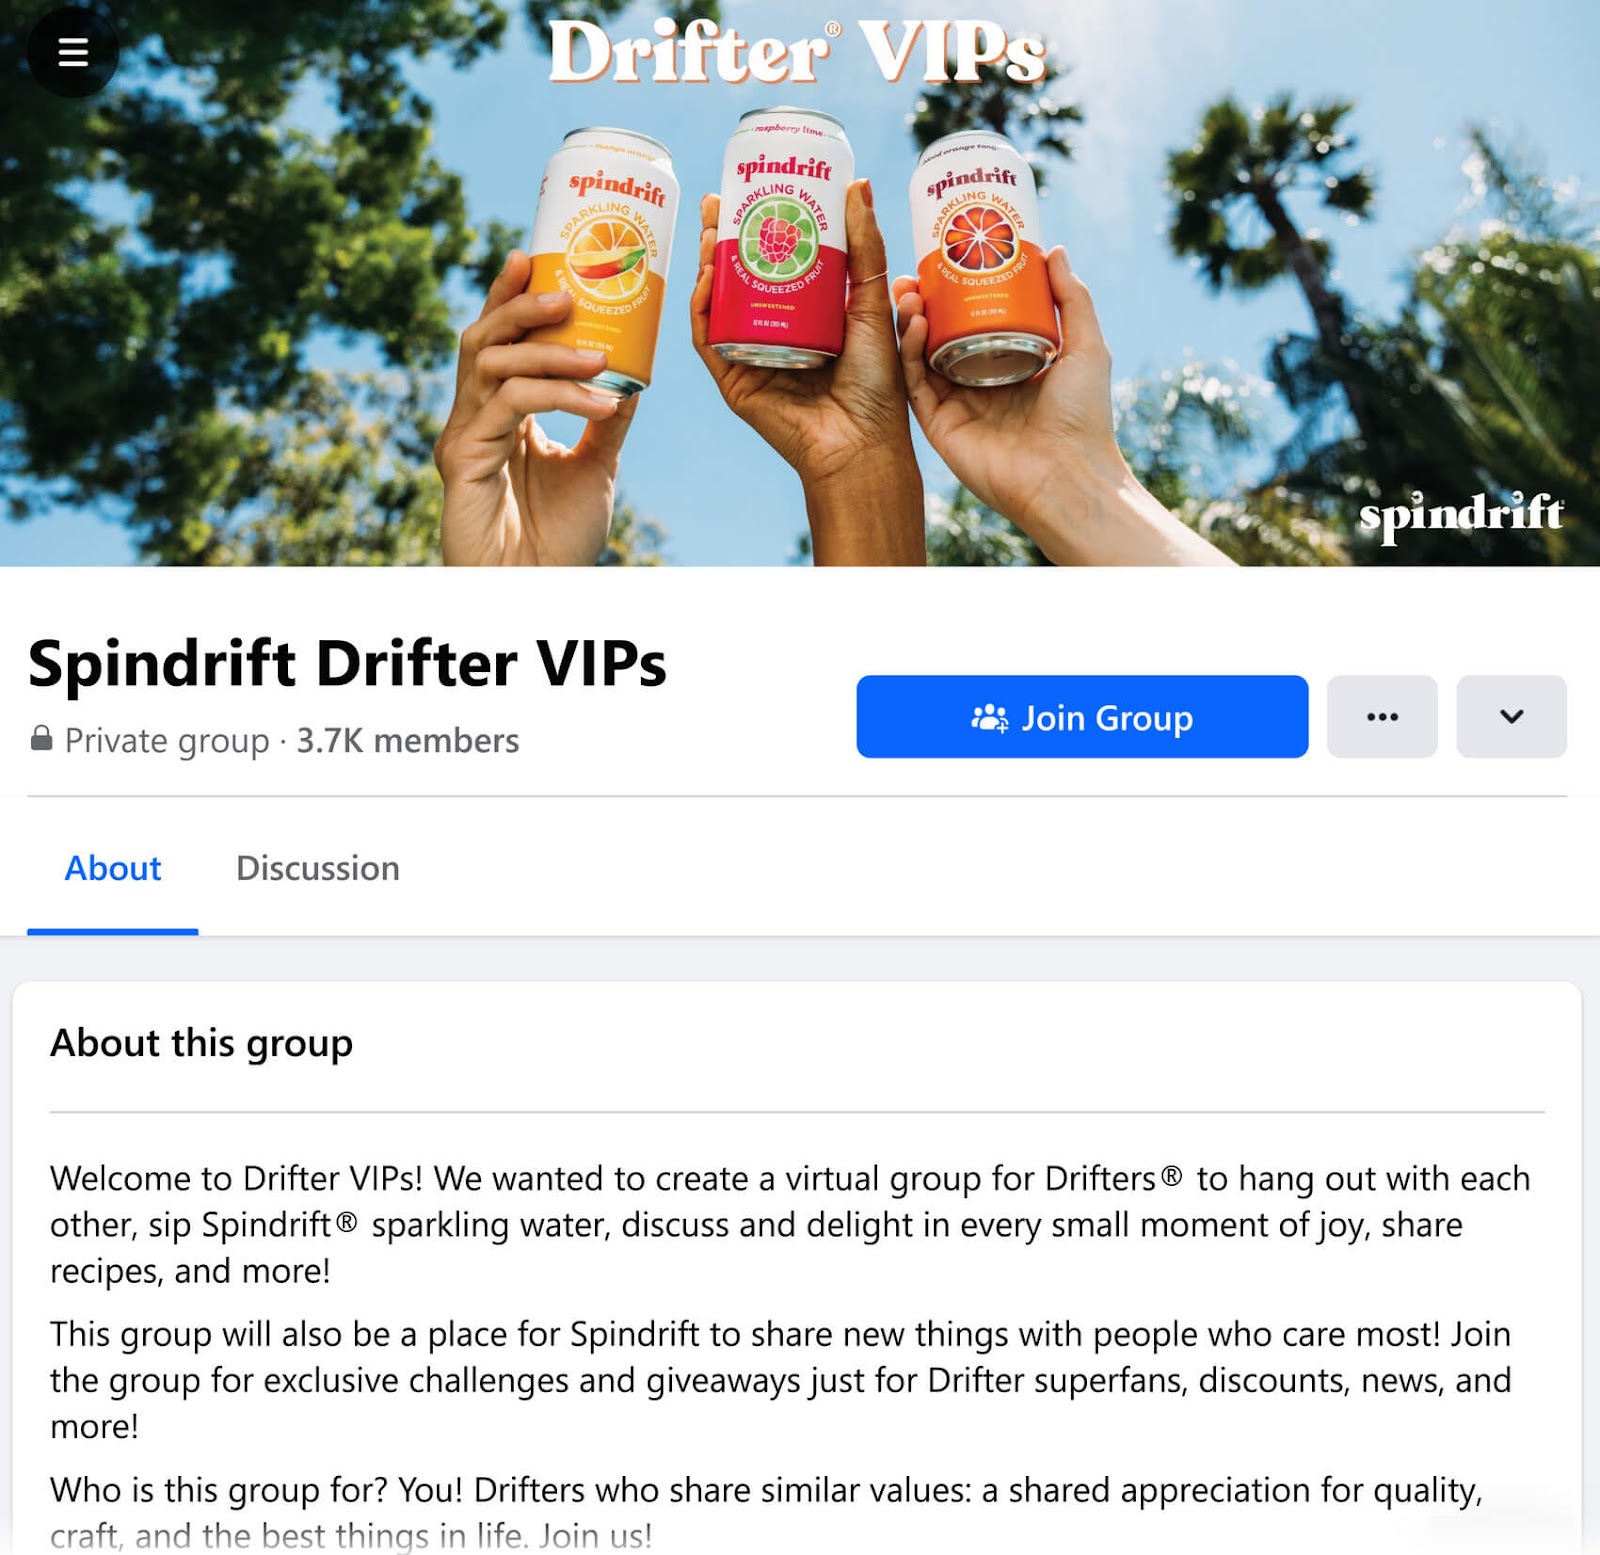 Spindrift Drifter VIPs private Facebook group with an open "About" section and visible "Join Group" button.